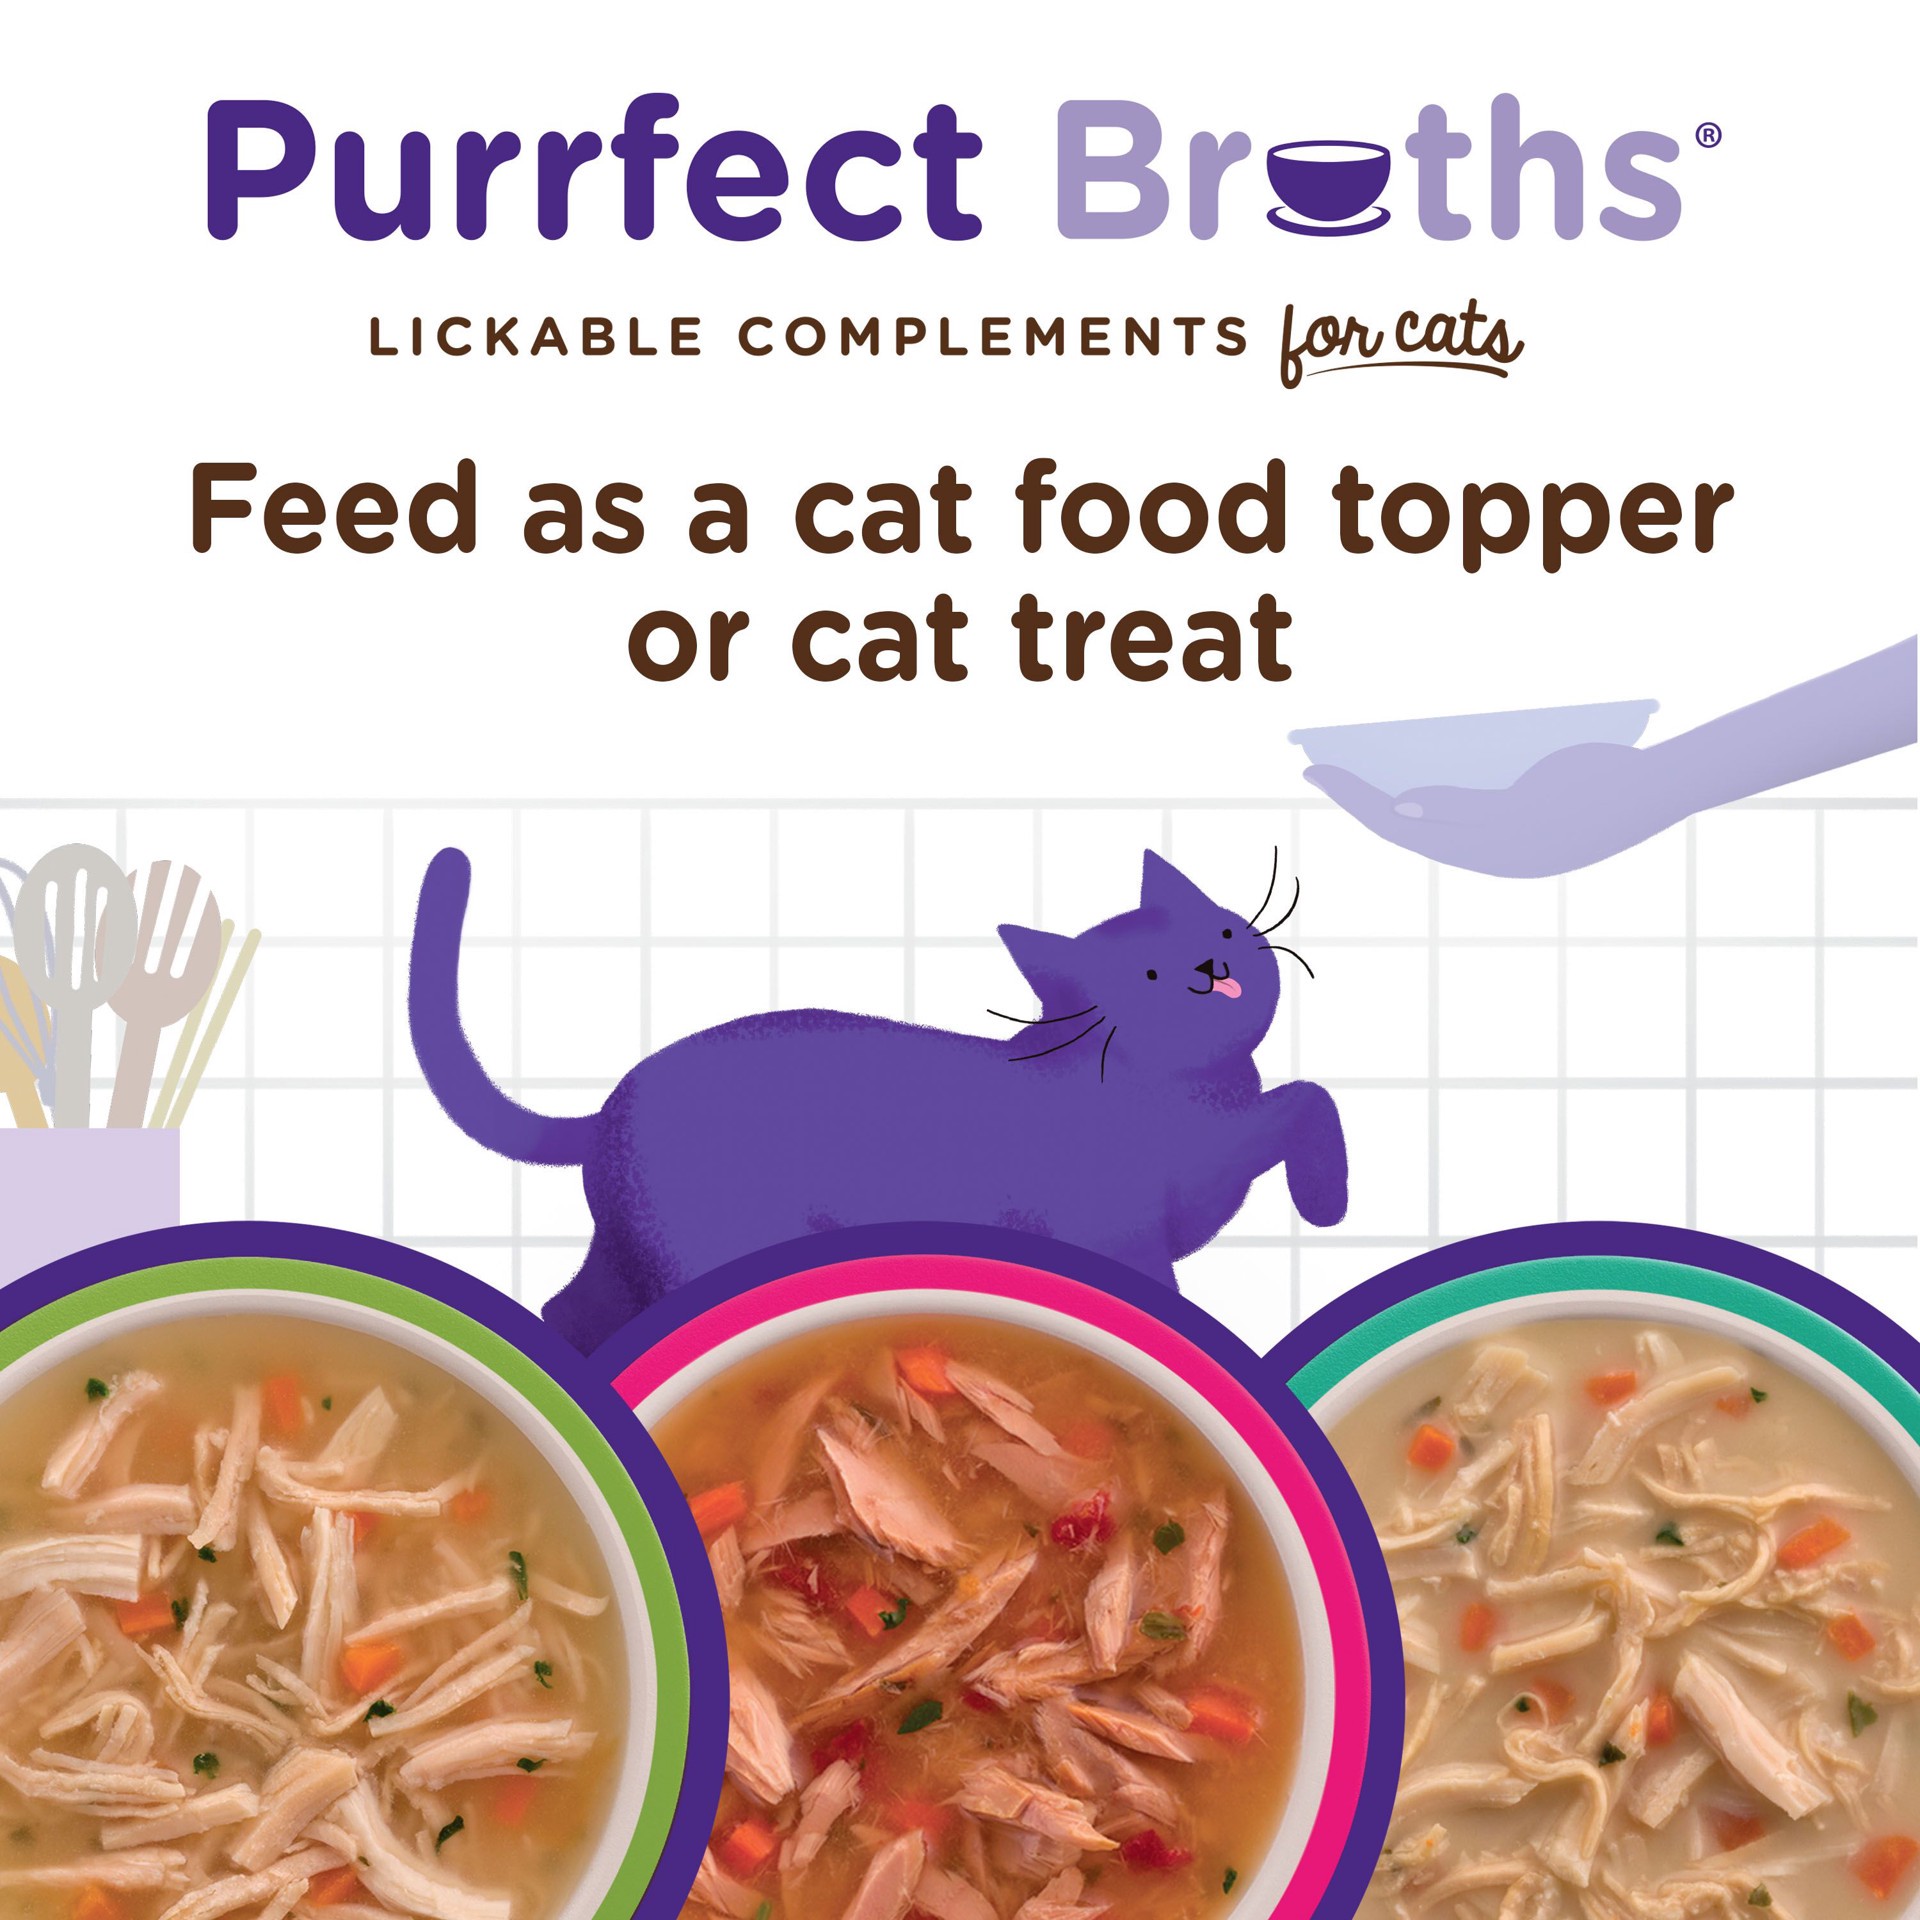 slide 5 of 8, Rachael Ray Nutrish Purrfect Broths Variety Pack, Lickable Complements for Cats, 1.4 oz. Pouch, 12 Count, 16.8 oz